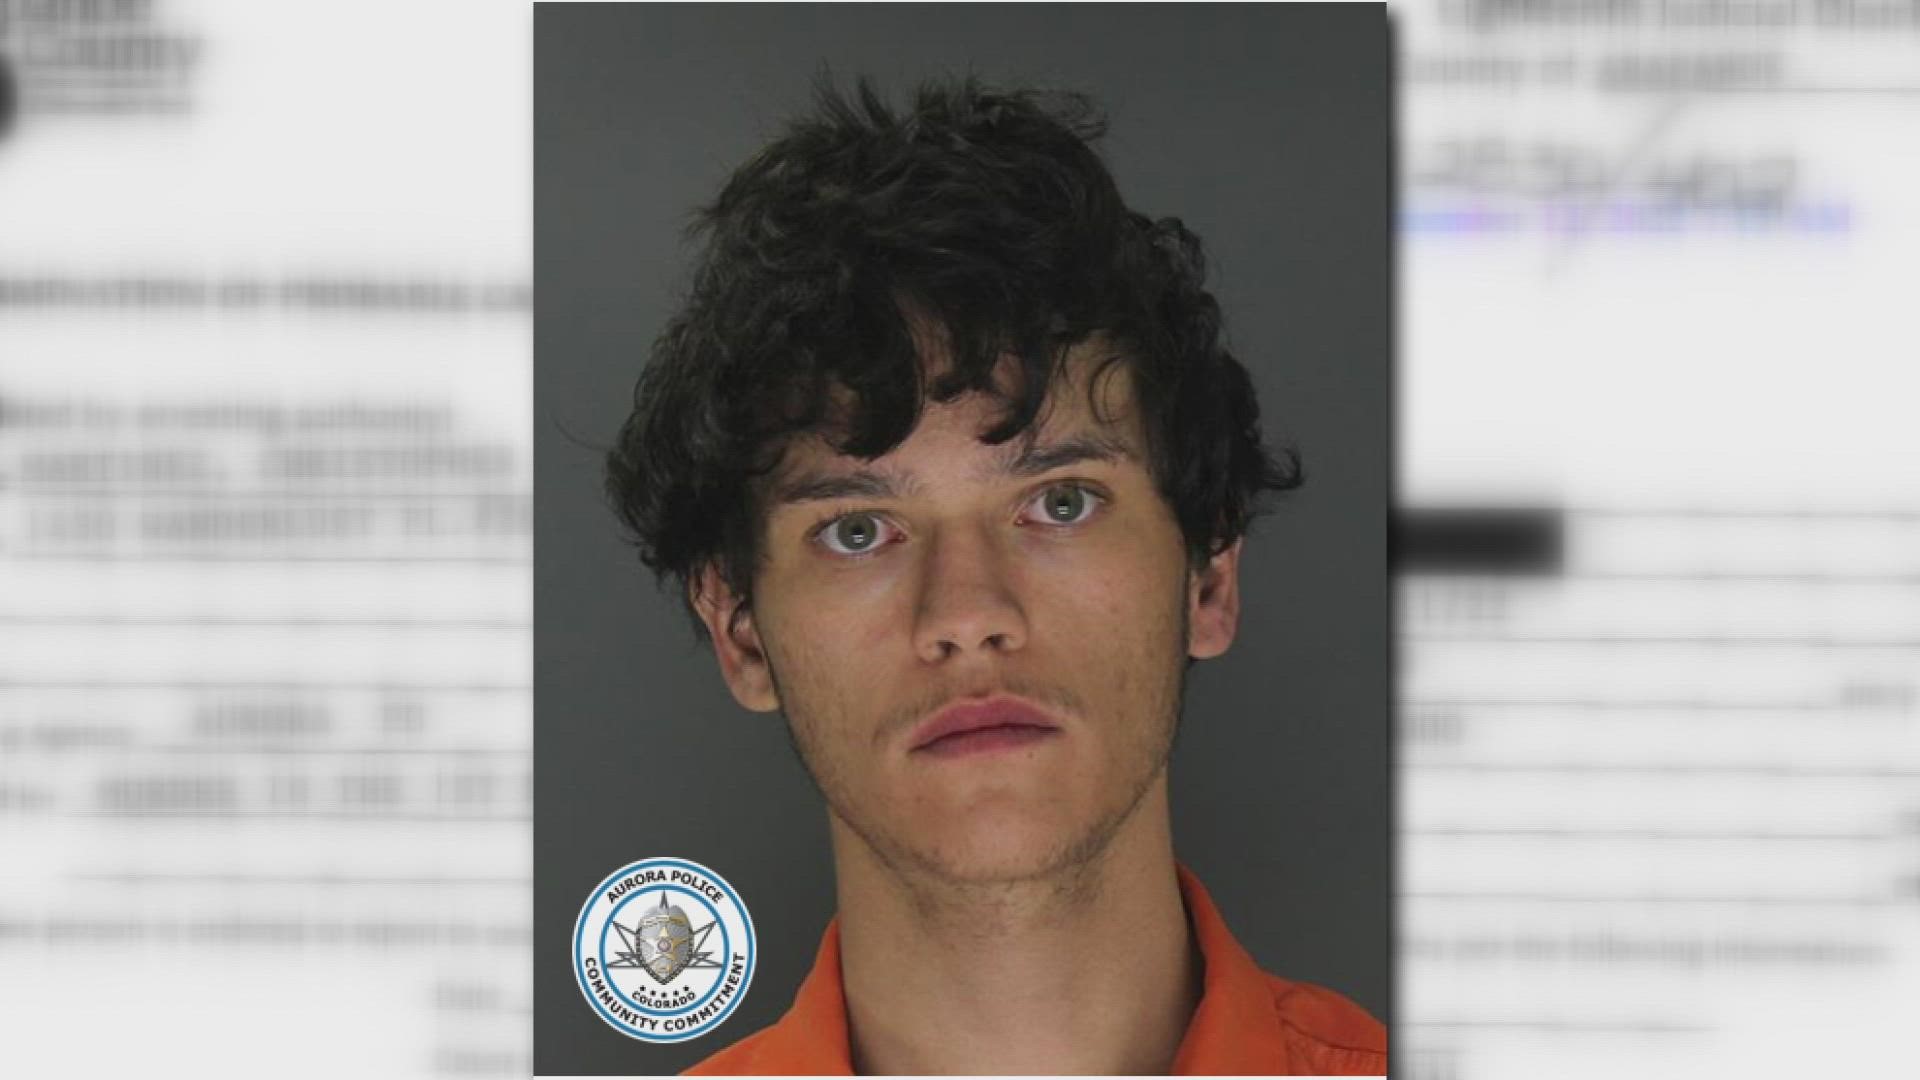 Christopher Martinez, 21, is accused of killing three people inside an Aurora home Friday night.